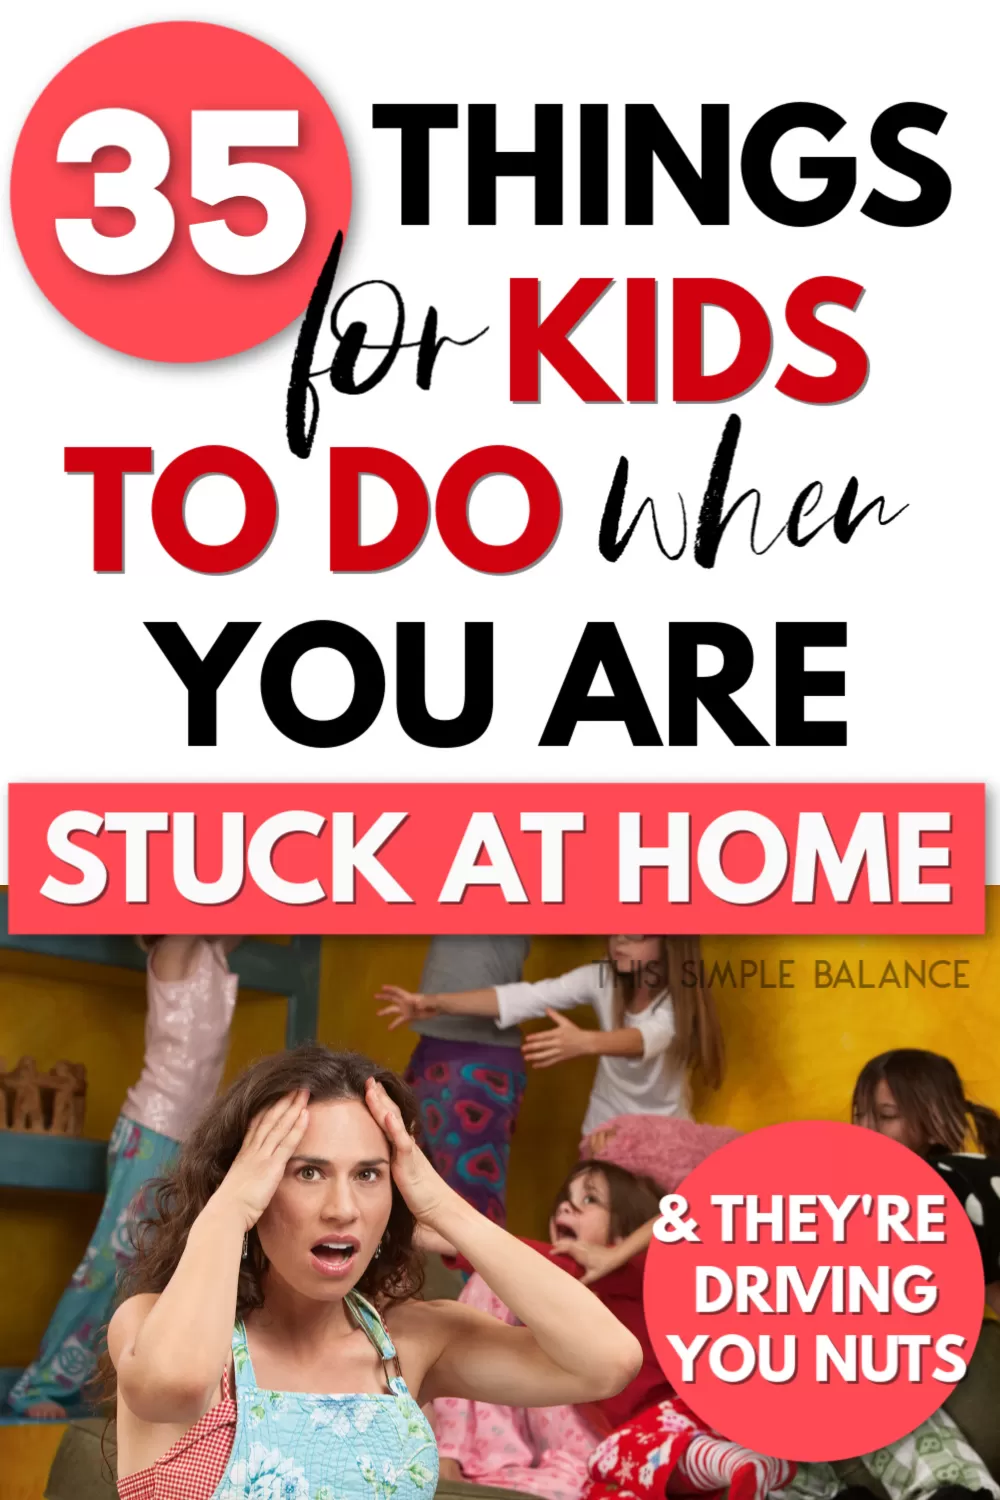 mom going crazy with little kids indoors jumping everywhere, with text overlay, "35 things for kids to do when you are stuck at home & they're driving you nuts"